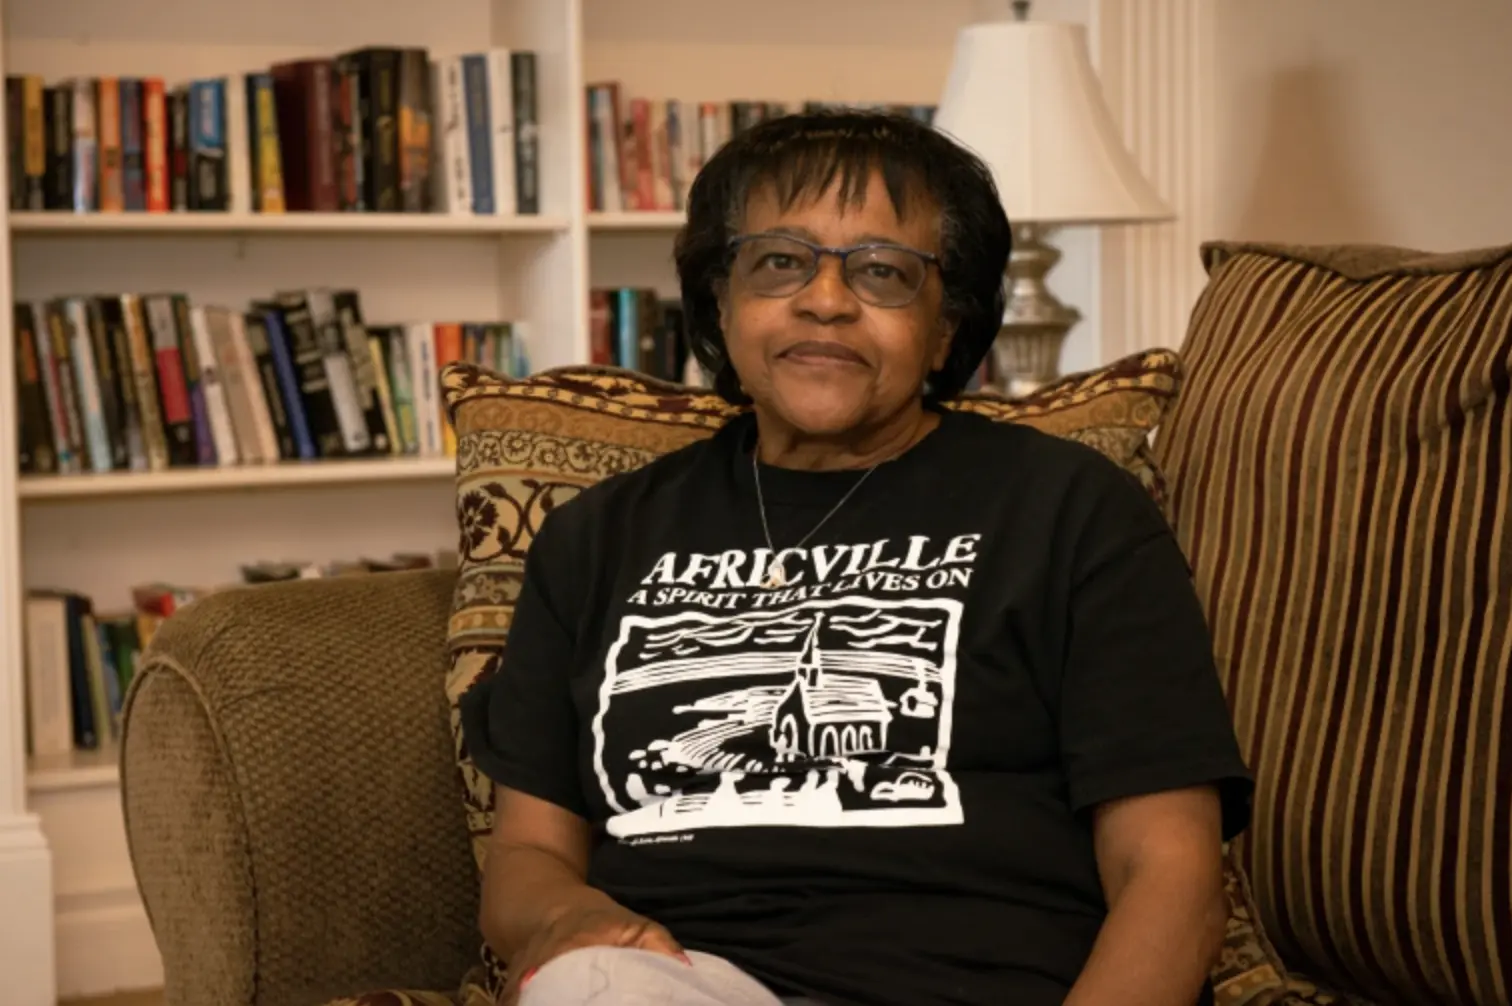 A woman sits in her home, in Africville shirt